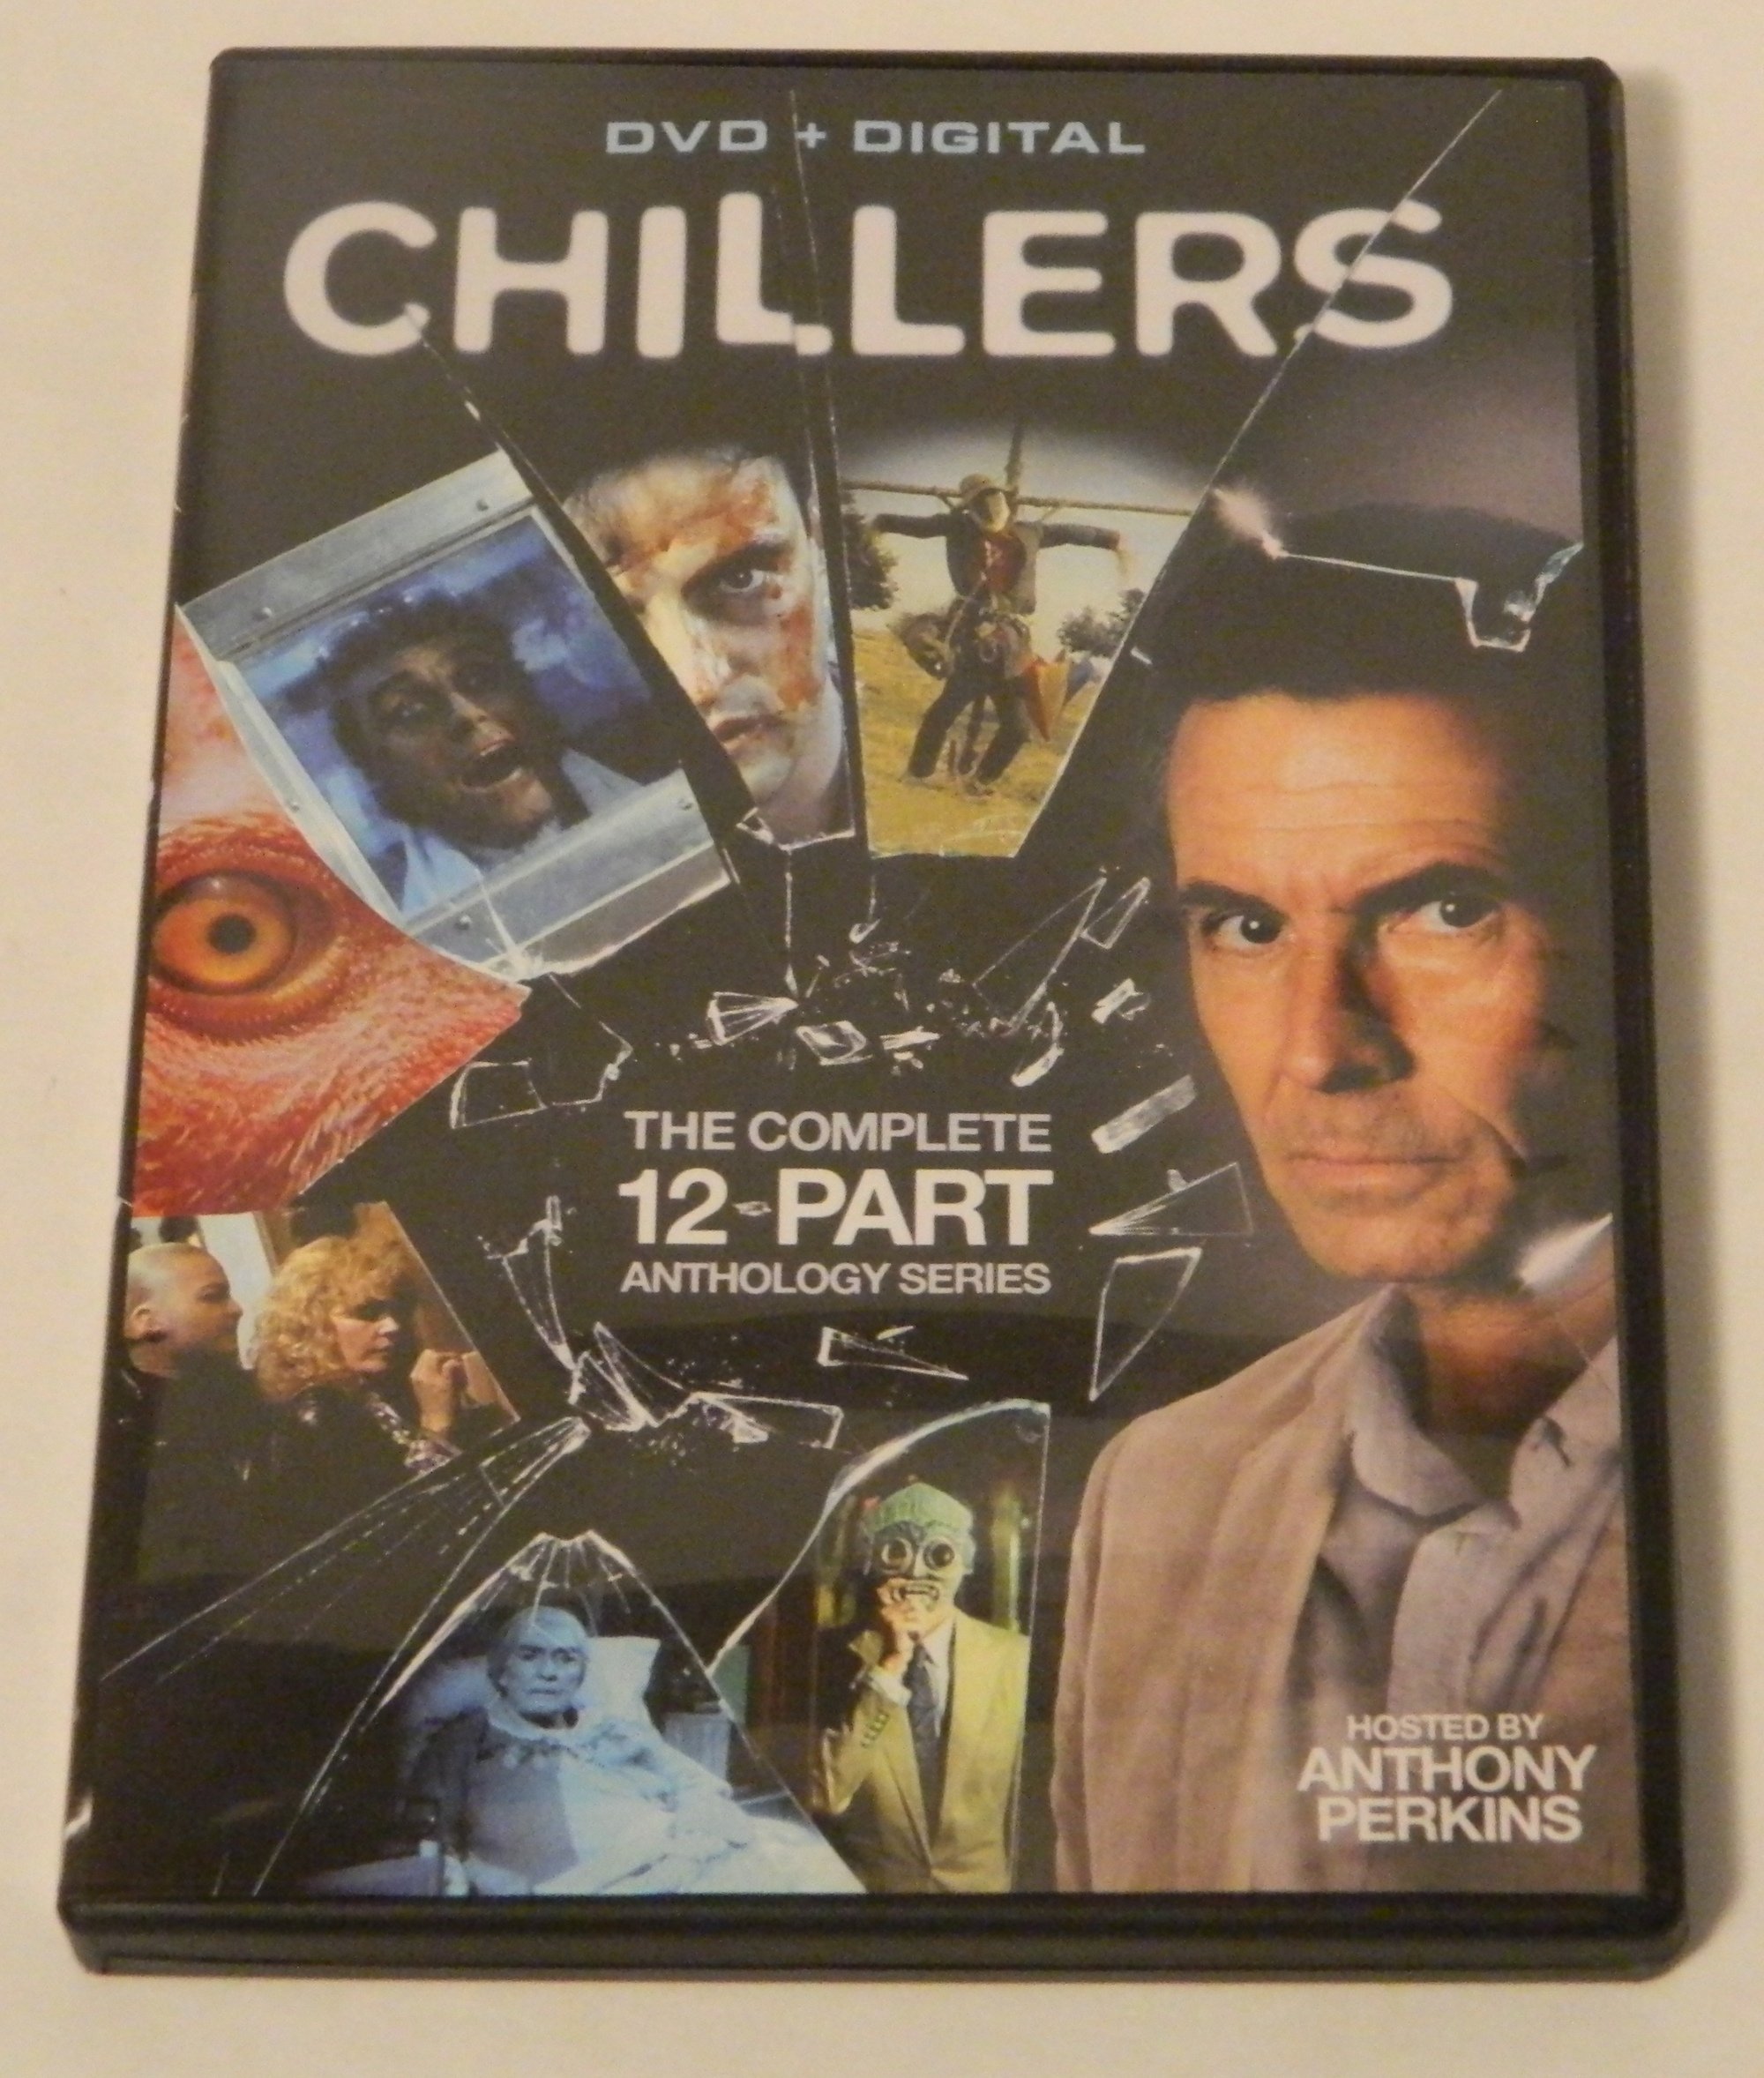 Chillers: The Complete 12 Part Anthology Series DVD Review